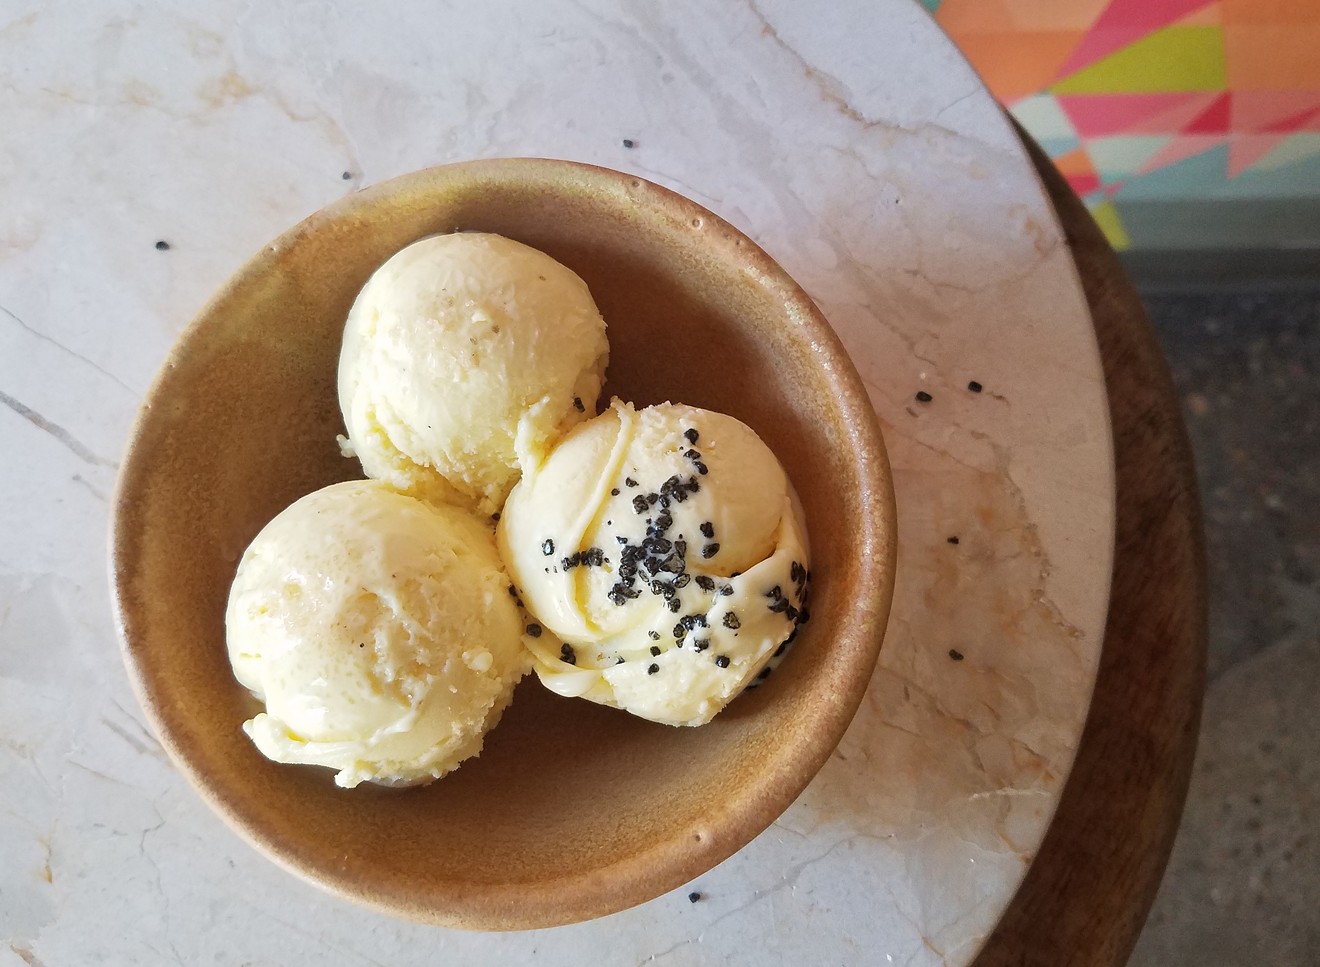 At Frozen Matter, you can get olive oil ice cream with three different salts on it.